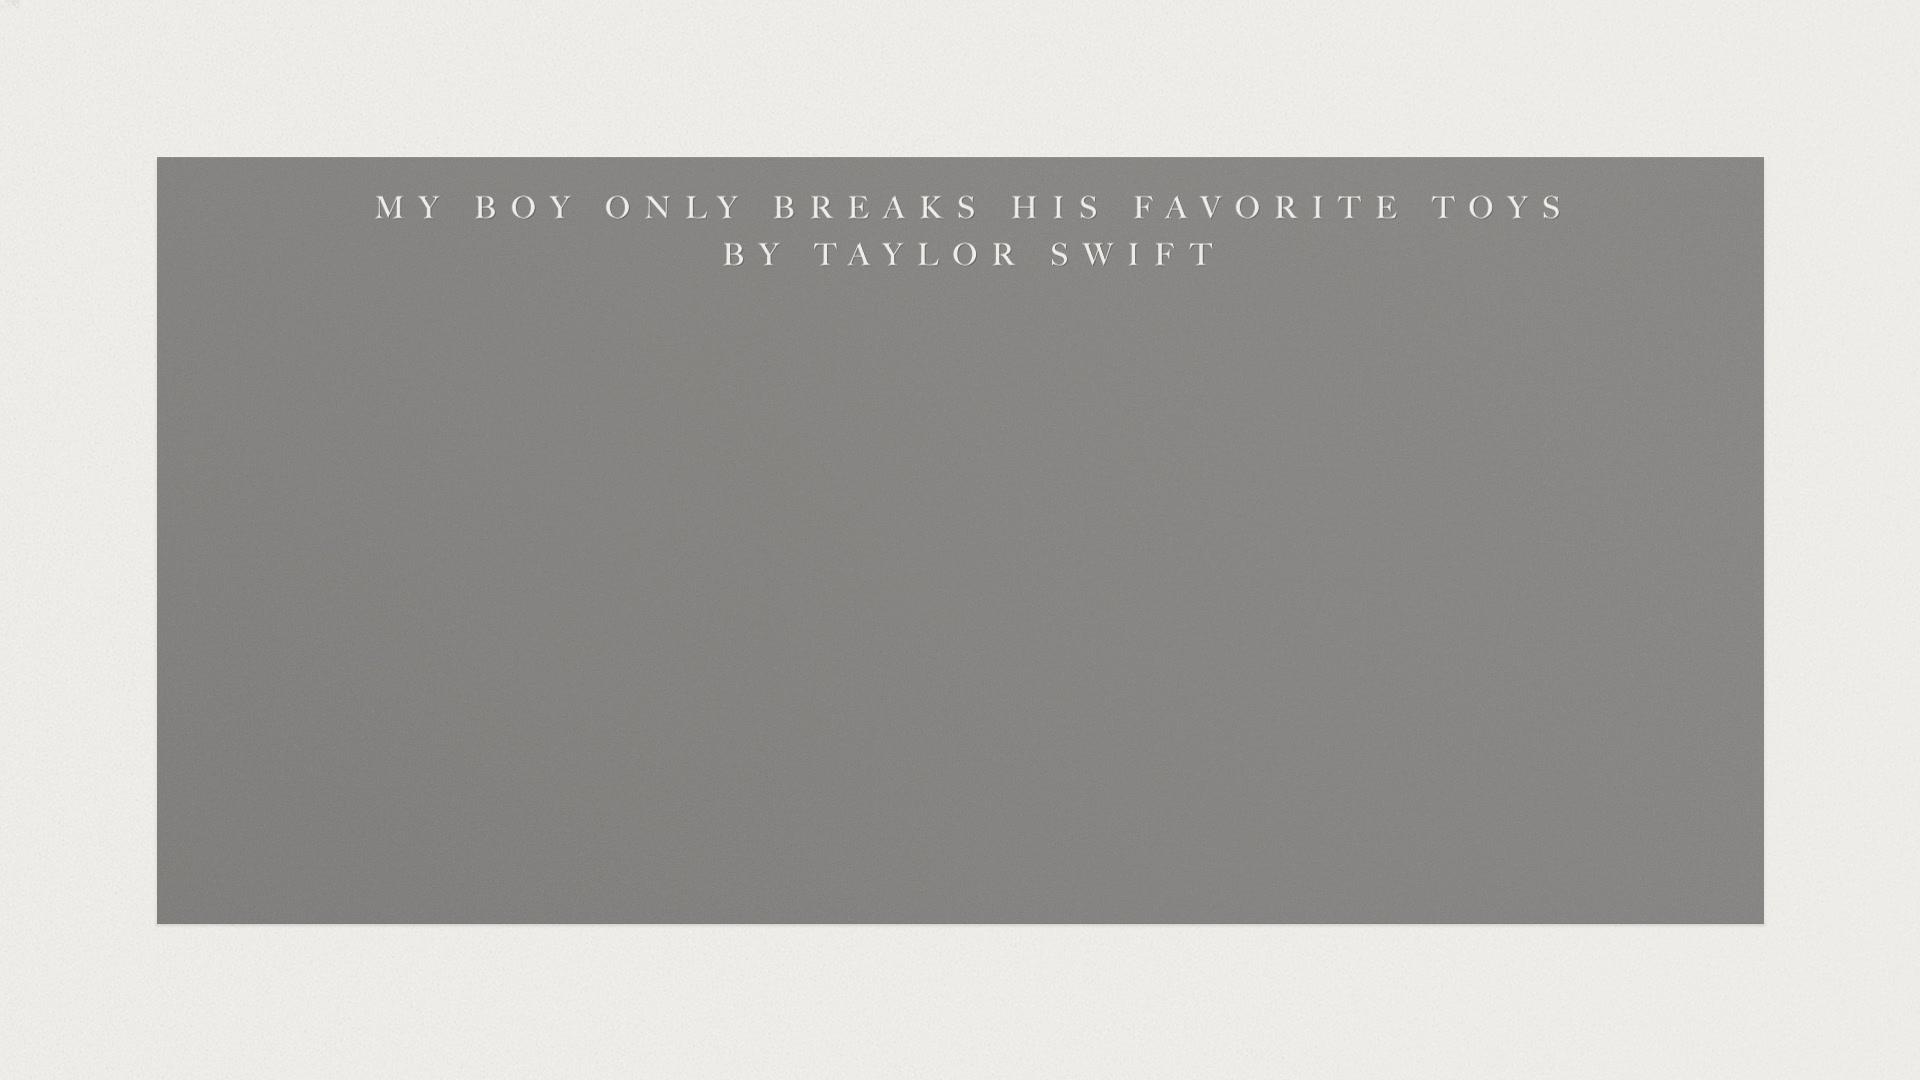 Taylor Swift - My Boy Only Breaks His Favorite Toys (Lyric Video)